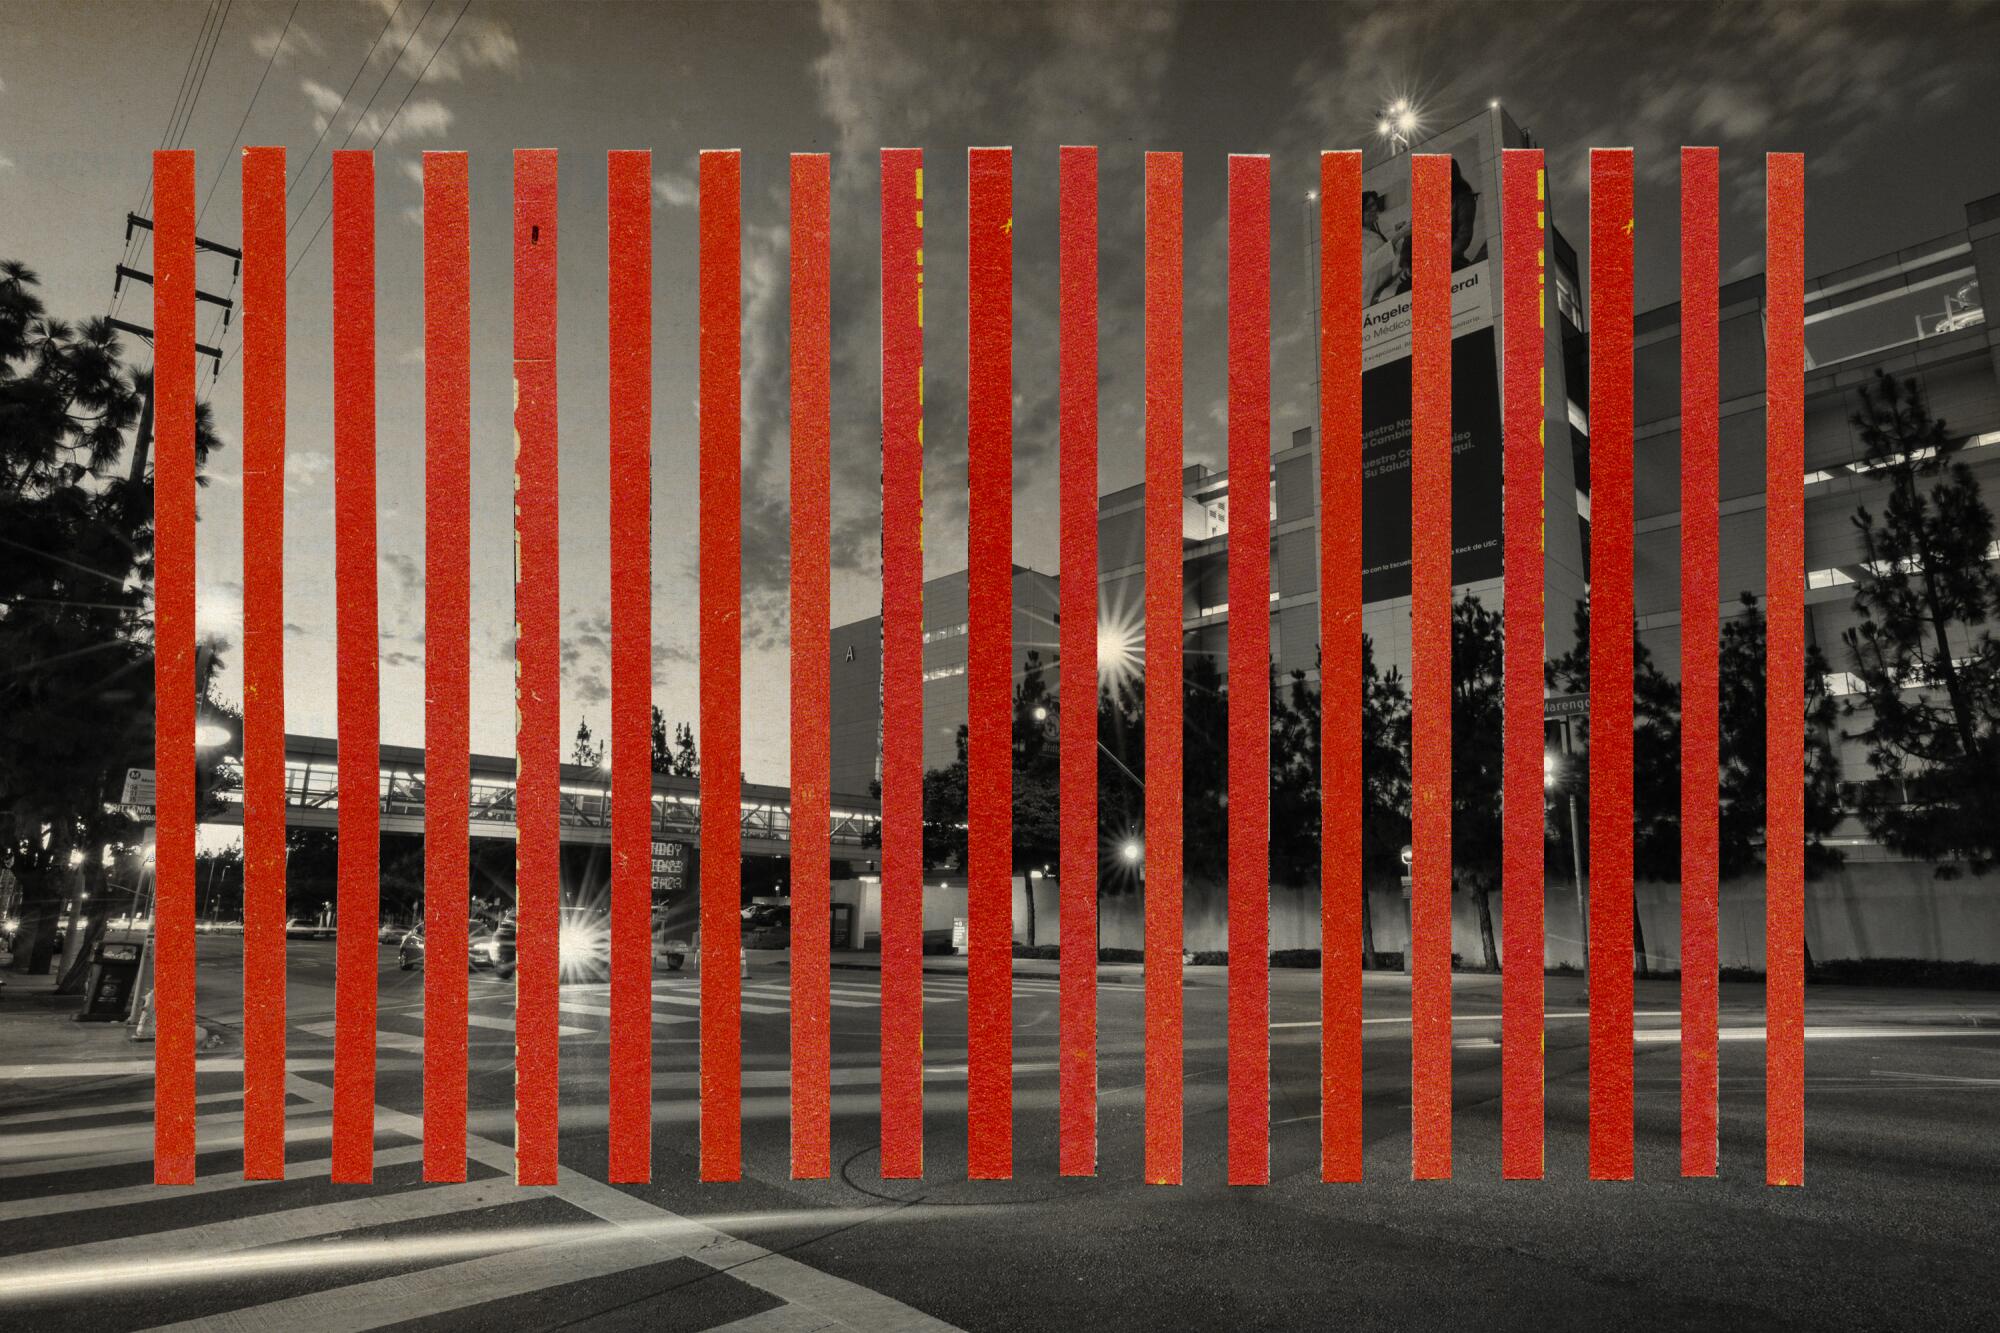 collage illustration of L.A. General hospital with red vertical stripes